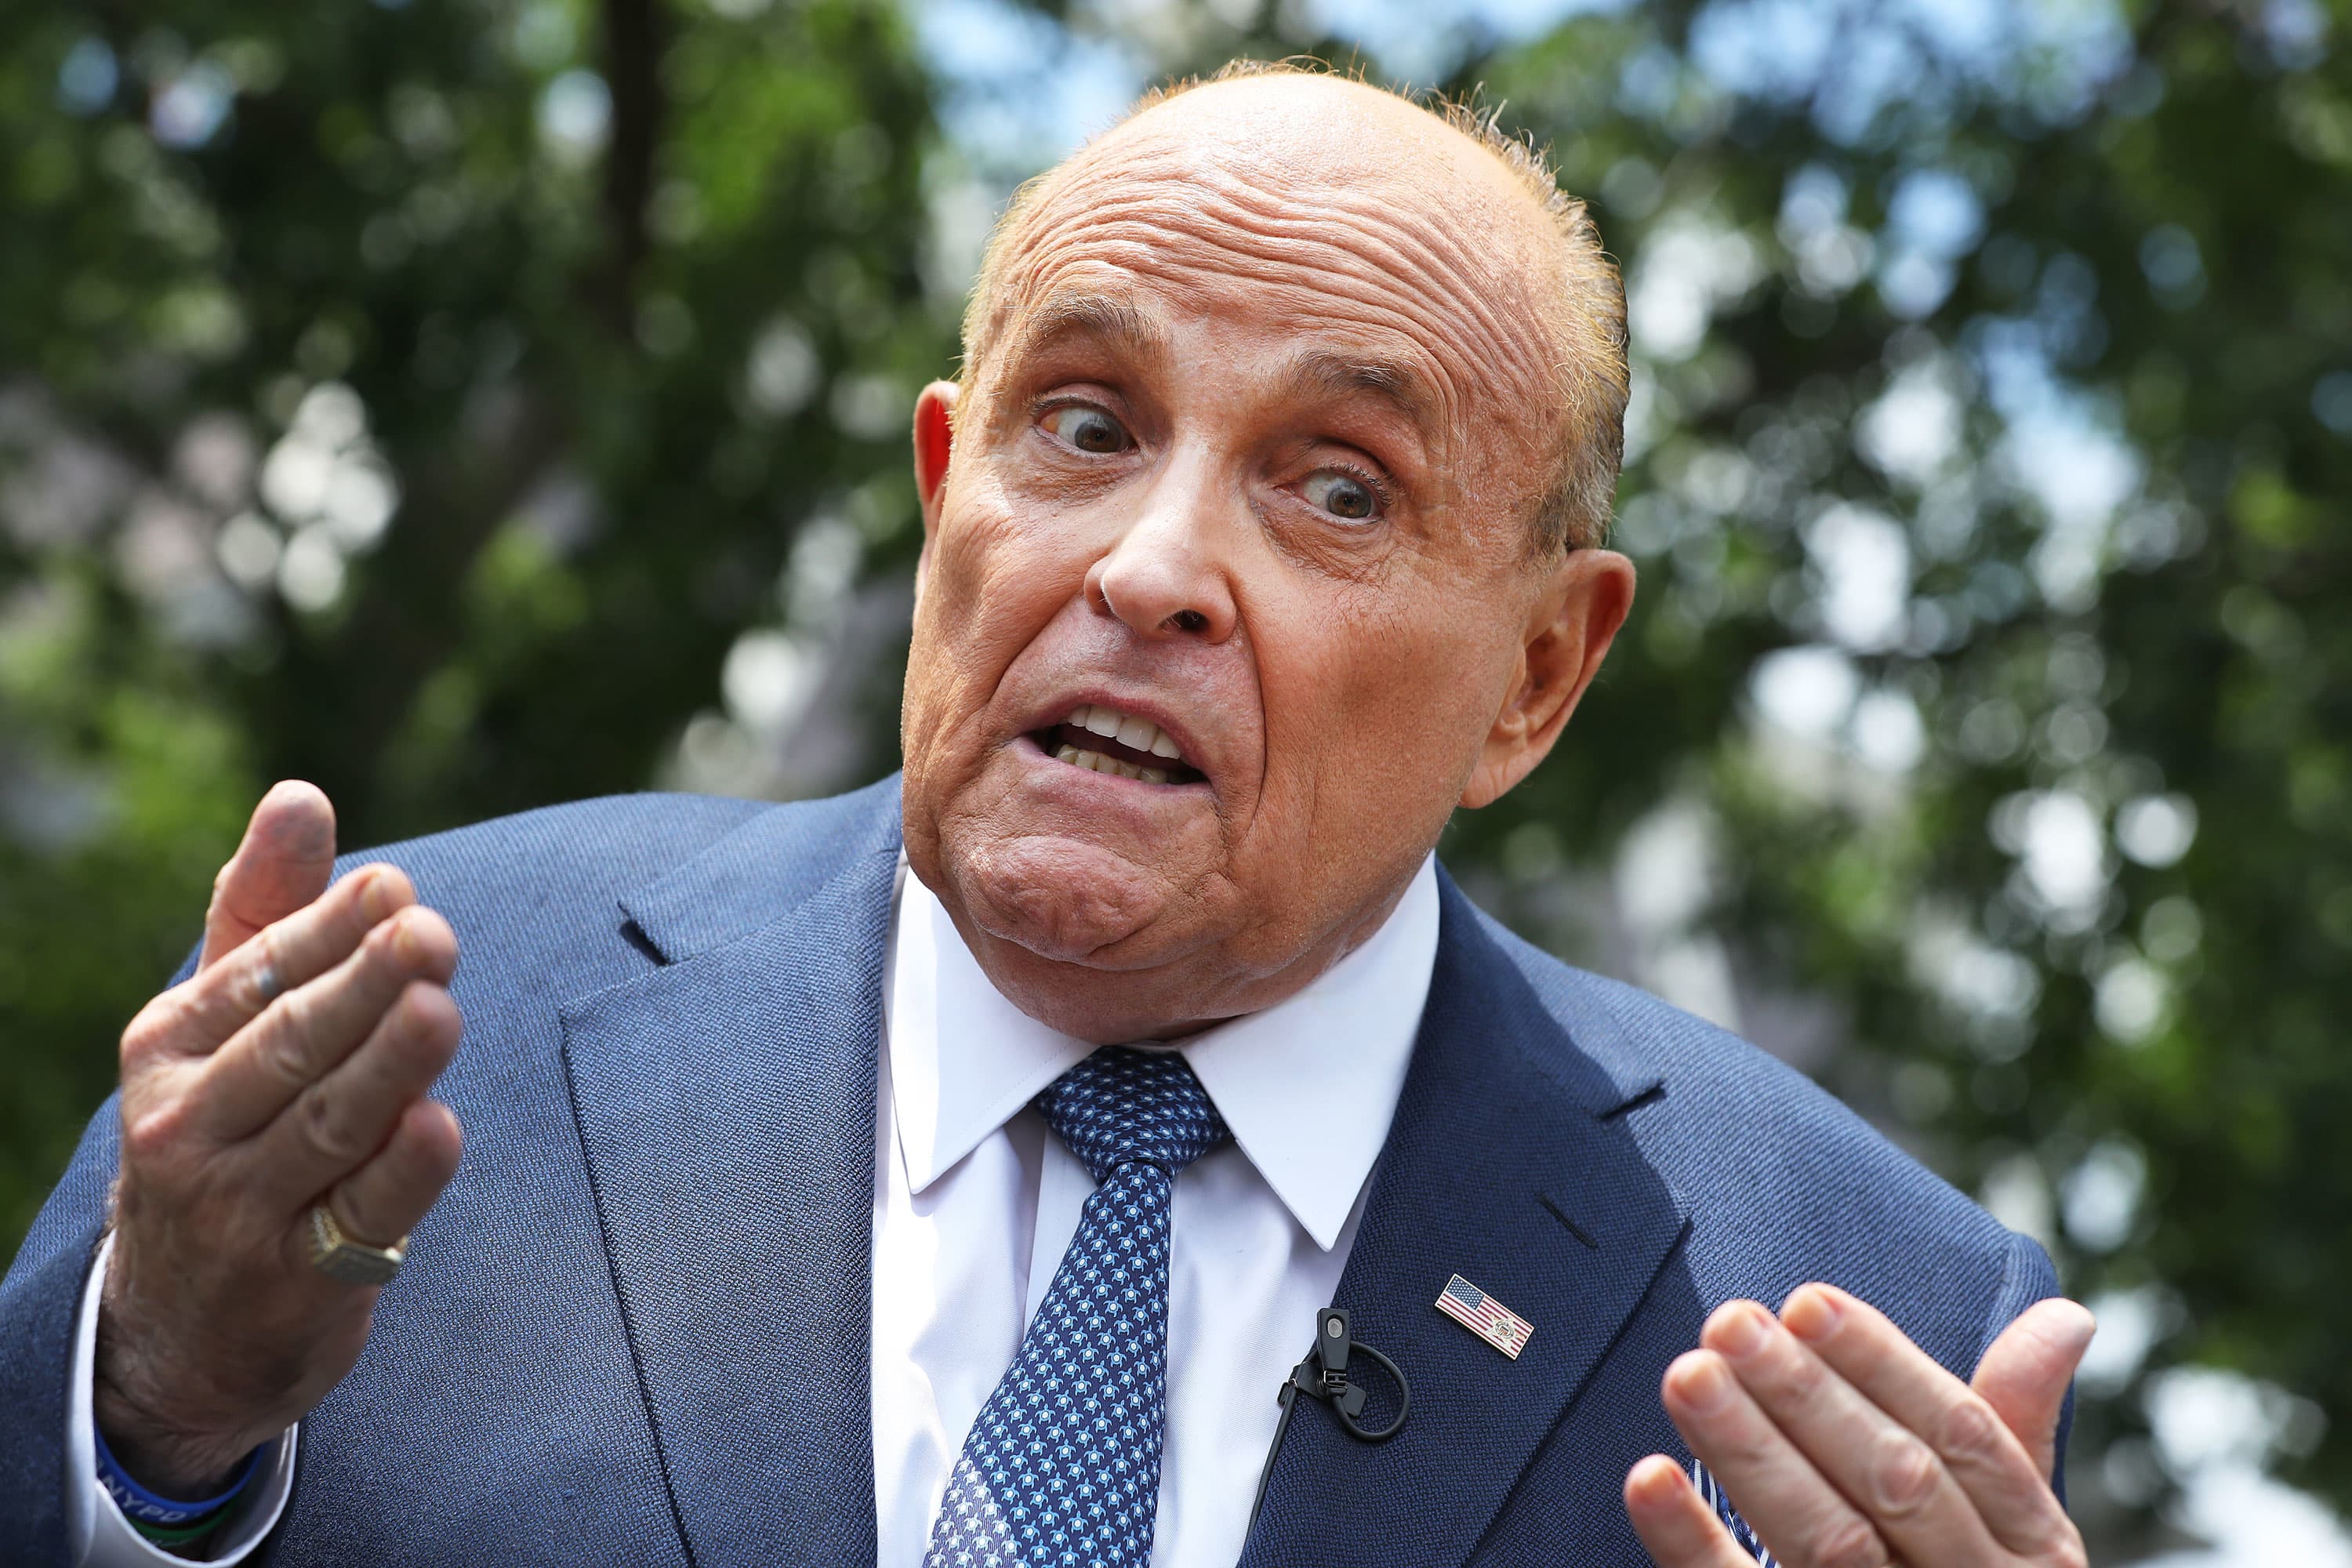 Dominion Voting warns Trump lawyer Rudy Giuliani about lawsuits